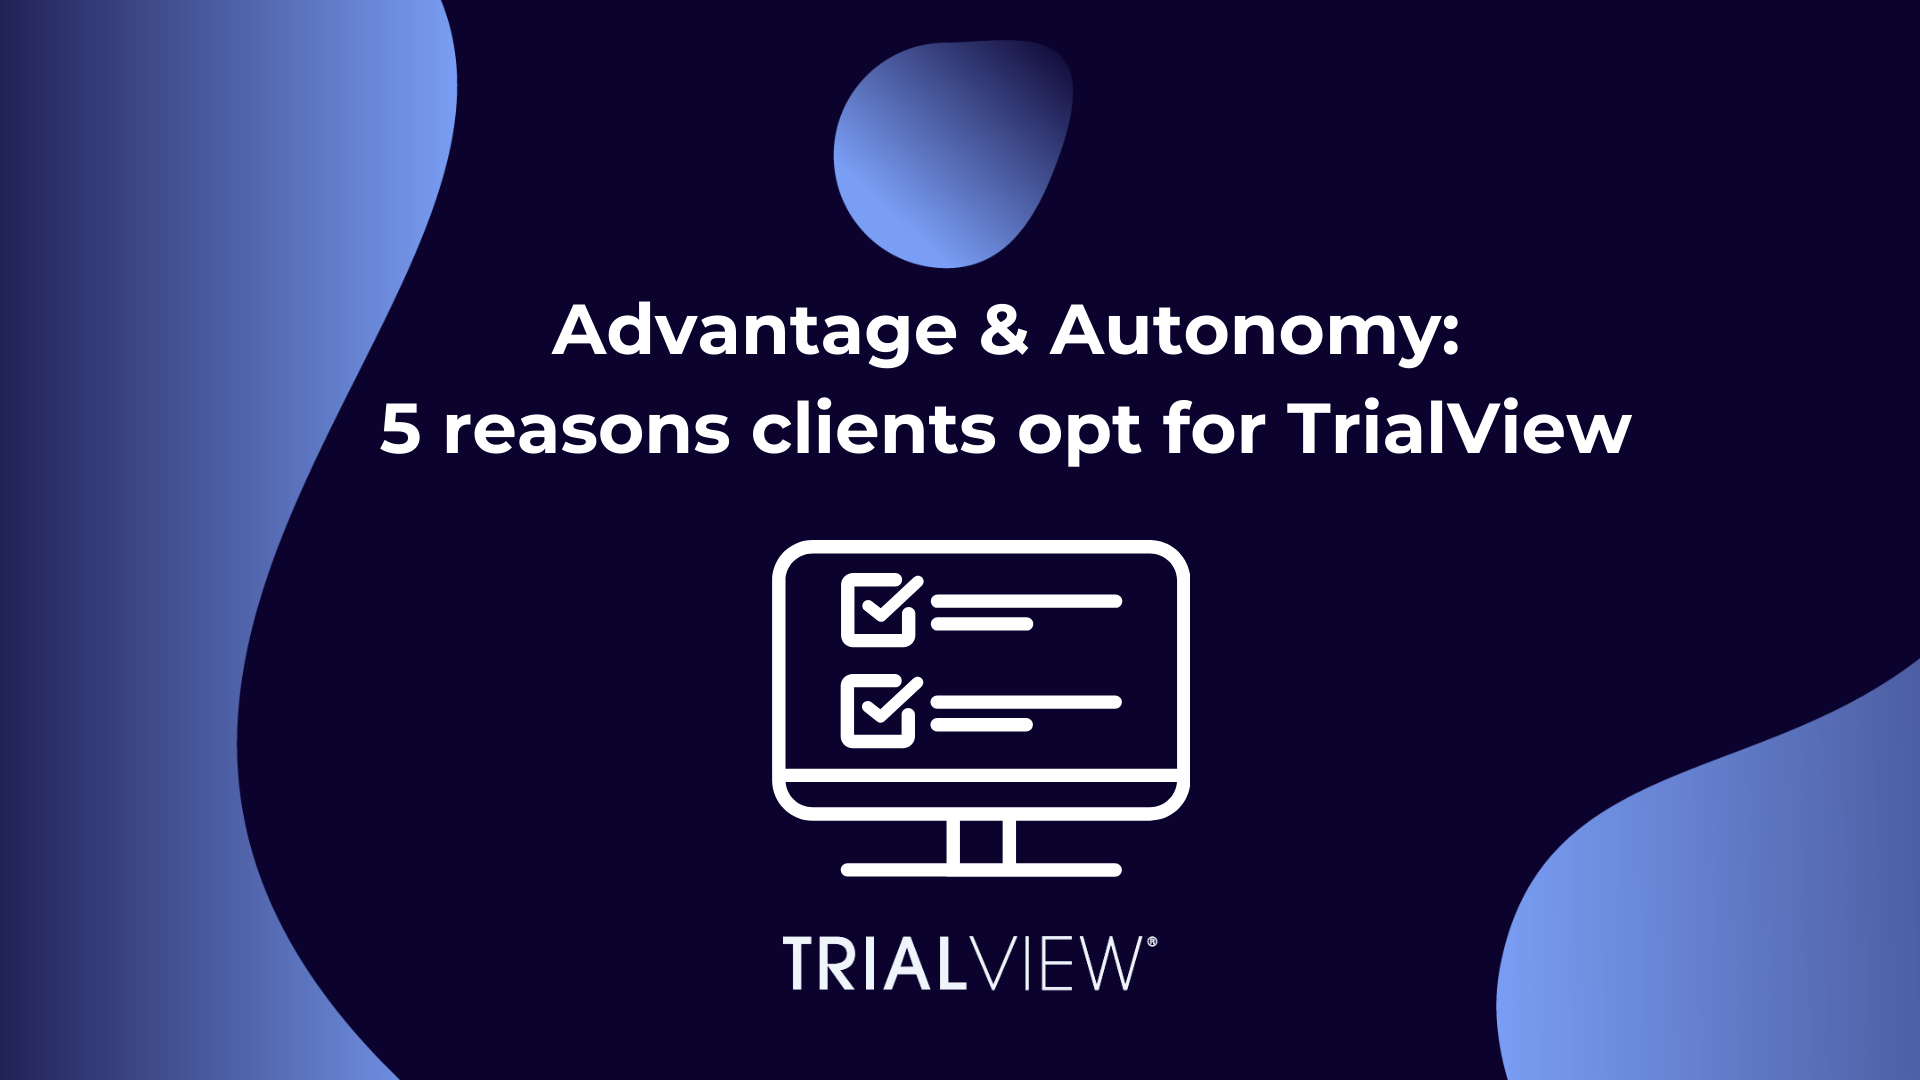 Advantage and Autonomy: 5 reasons why clients opt for TrialView